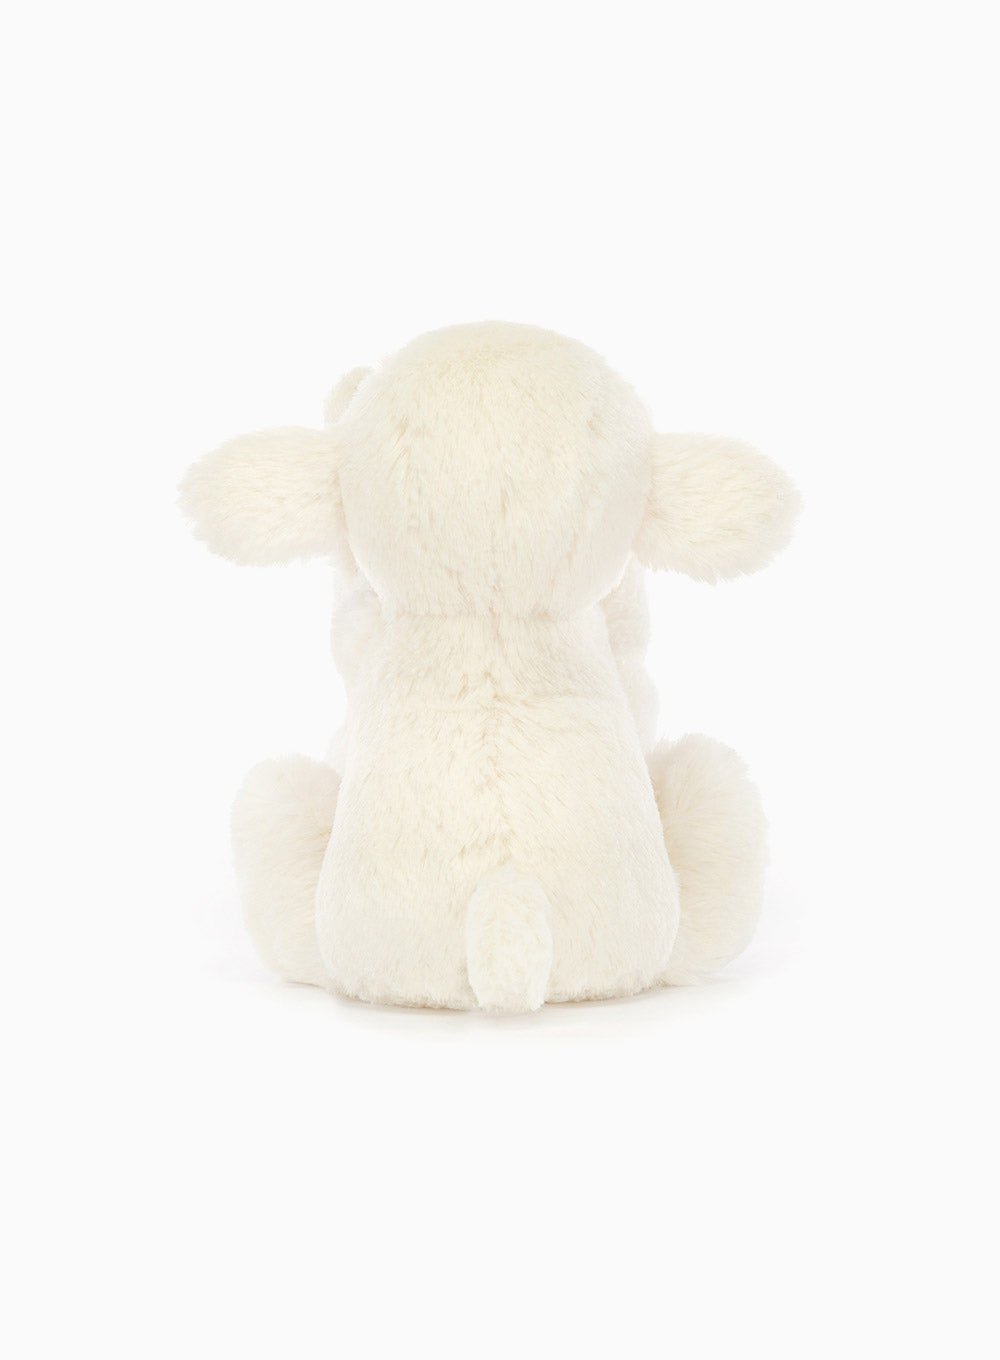 Jellycat Bashful Lamb Soother Blanket